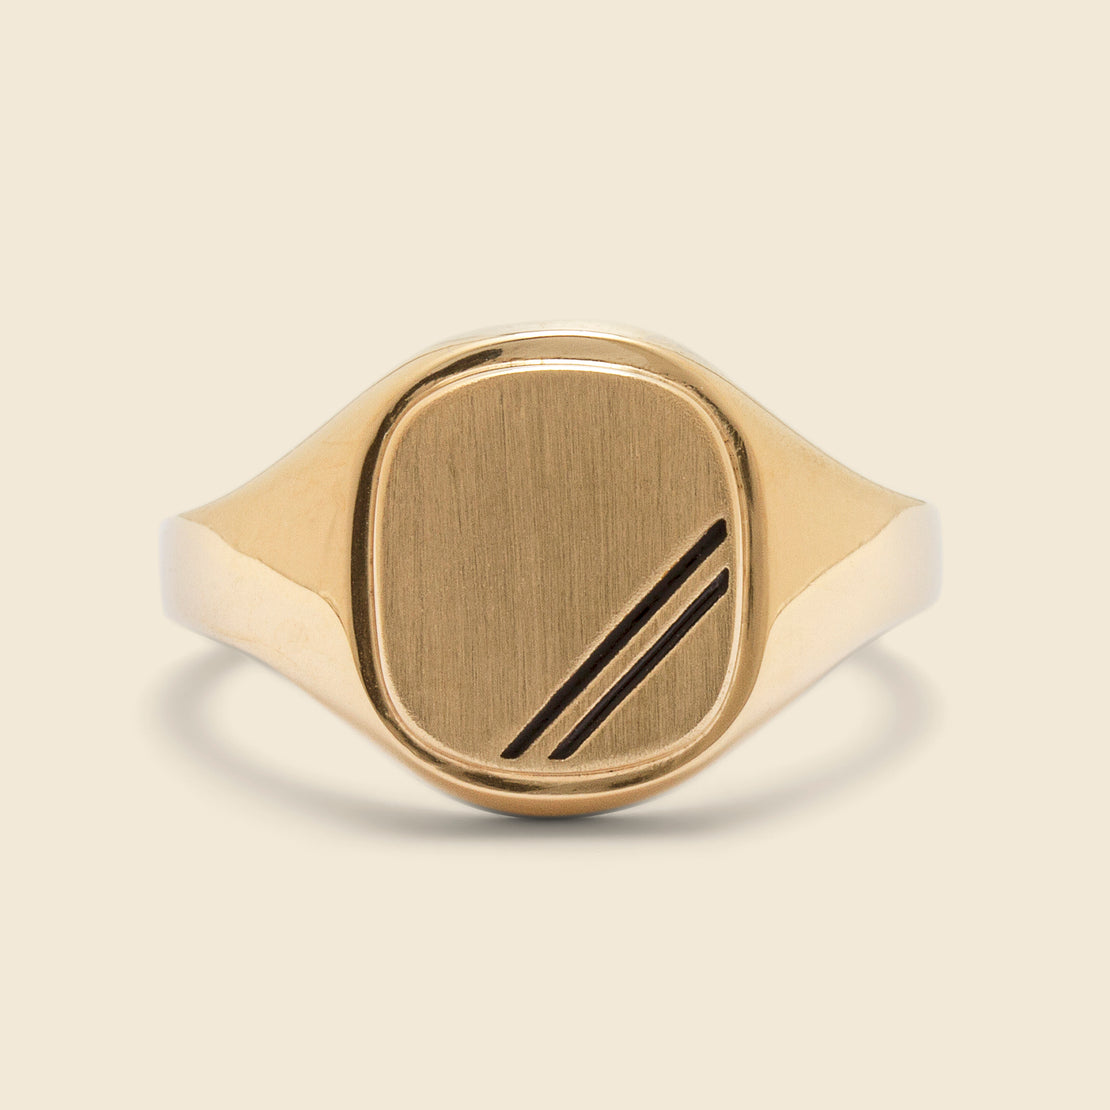 Square Step Ring - Black Enamel/Gold Vermeil - Miansai - STAG Provisions - Accessories - Rings